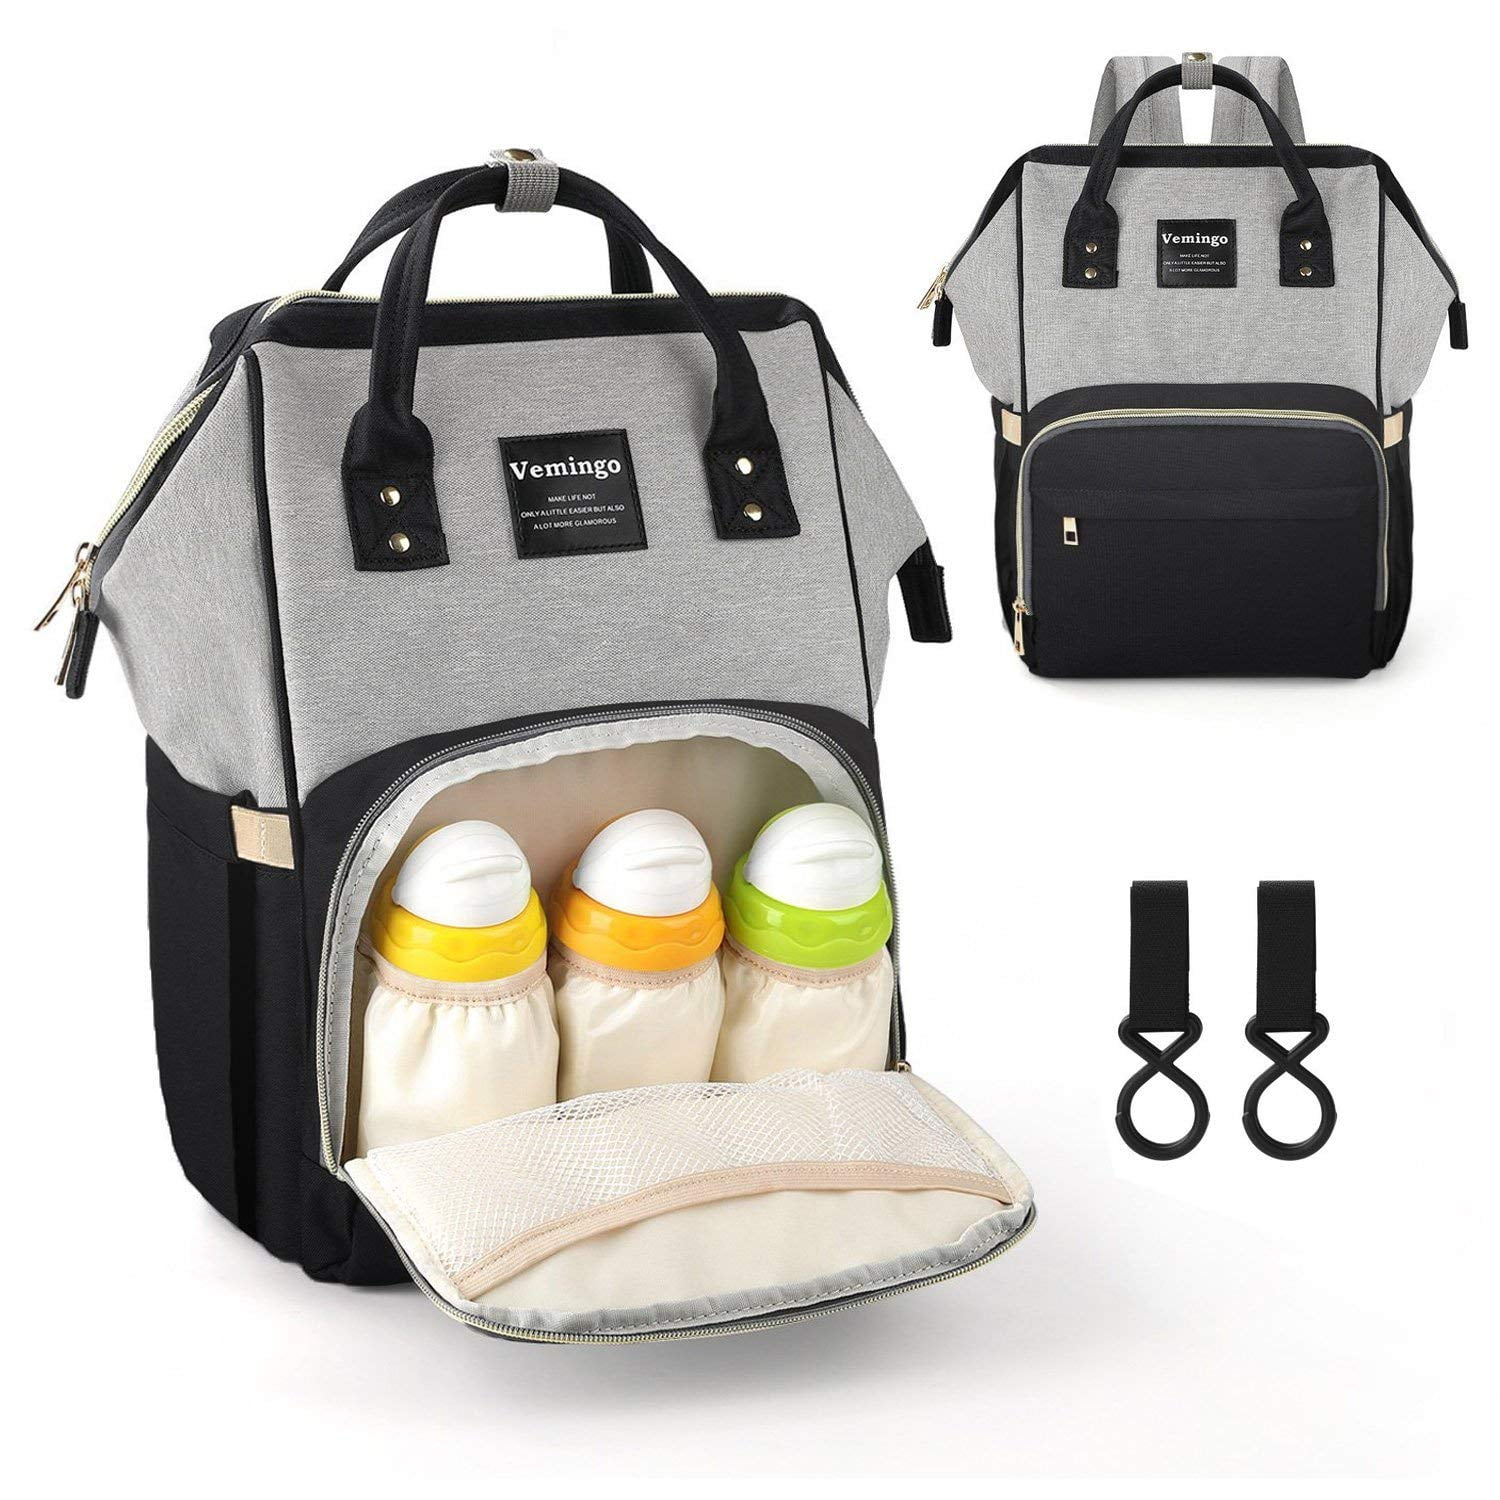 Stroller Baby Diaper Bag Nappy Changing Storage Pouch Organizer Travel Tote Bag 